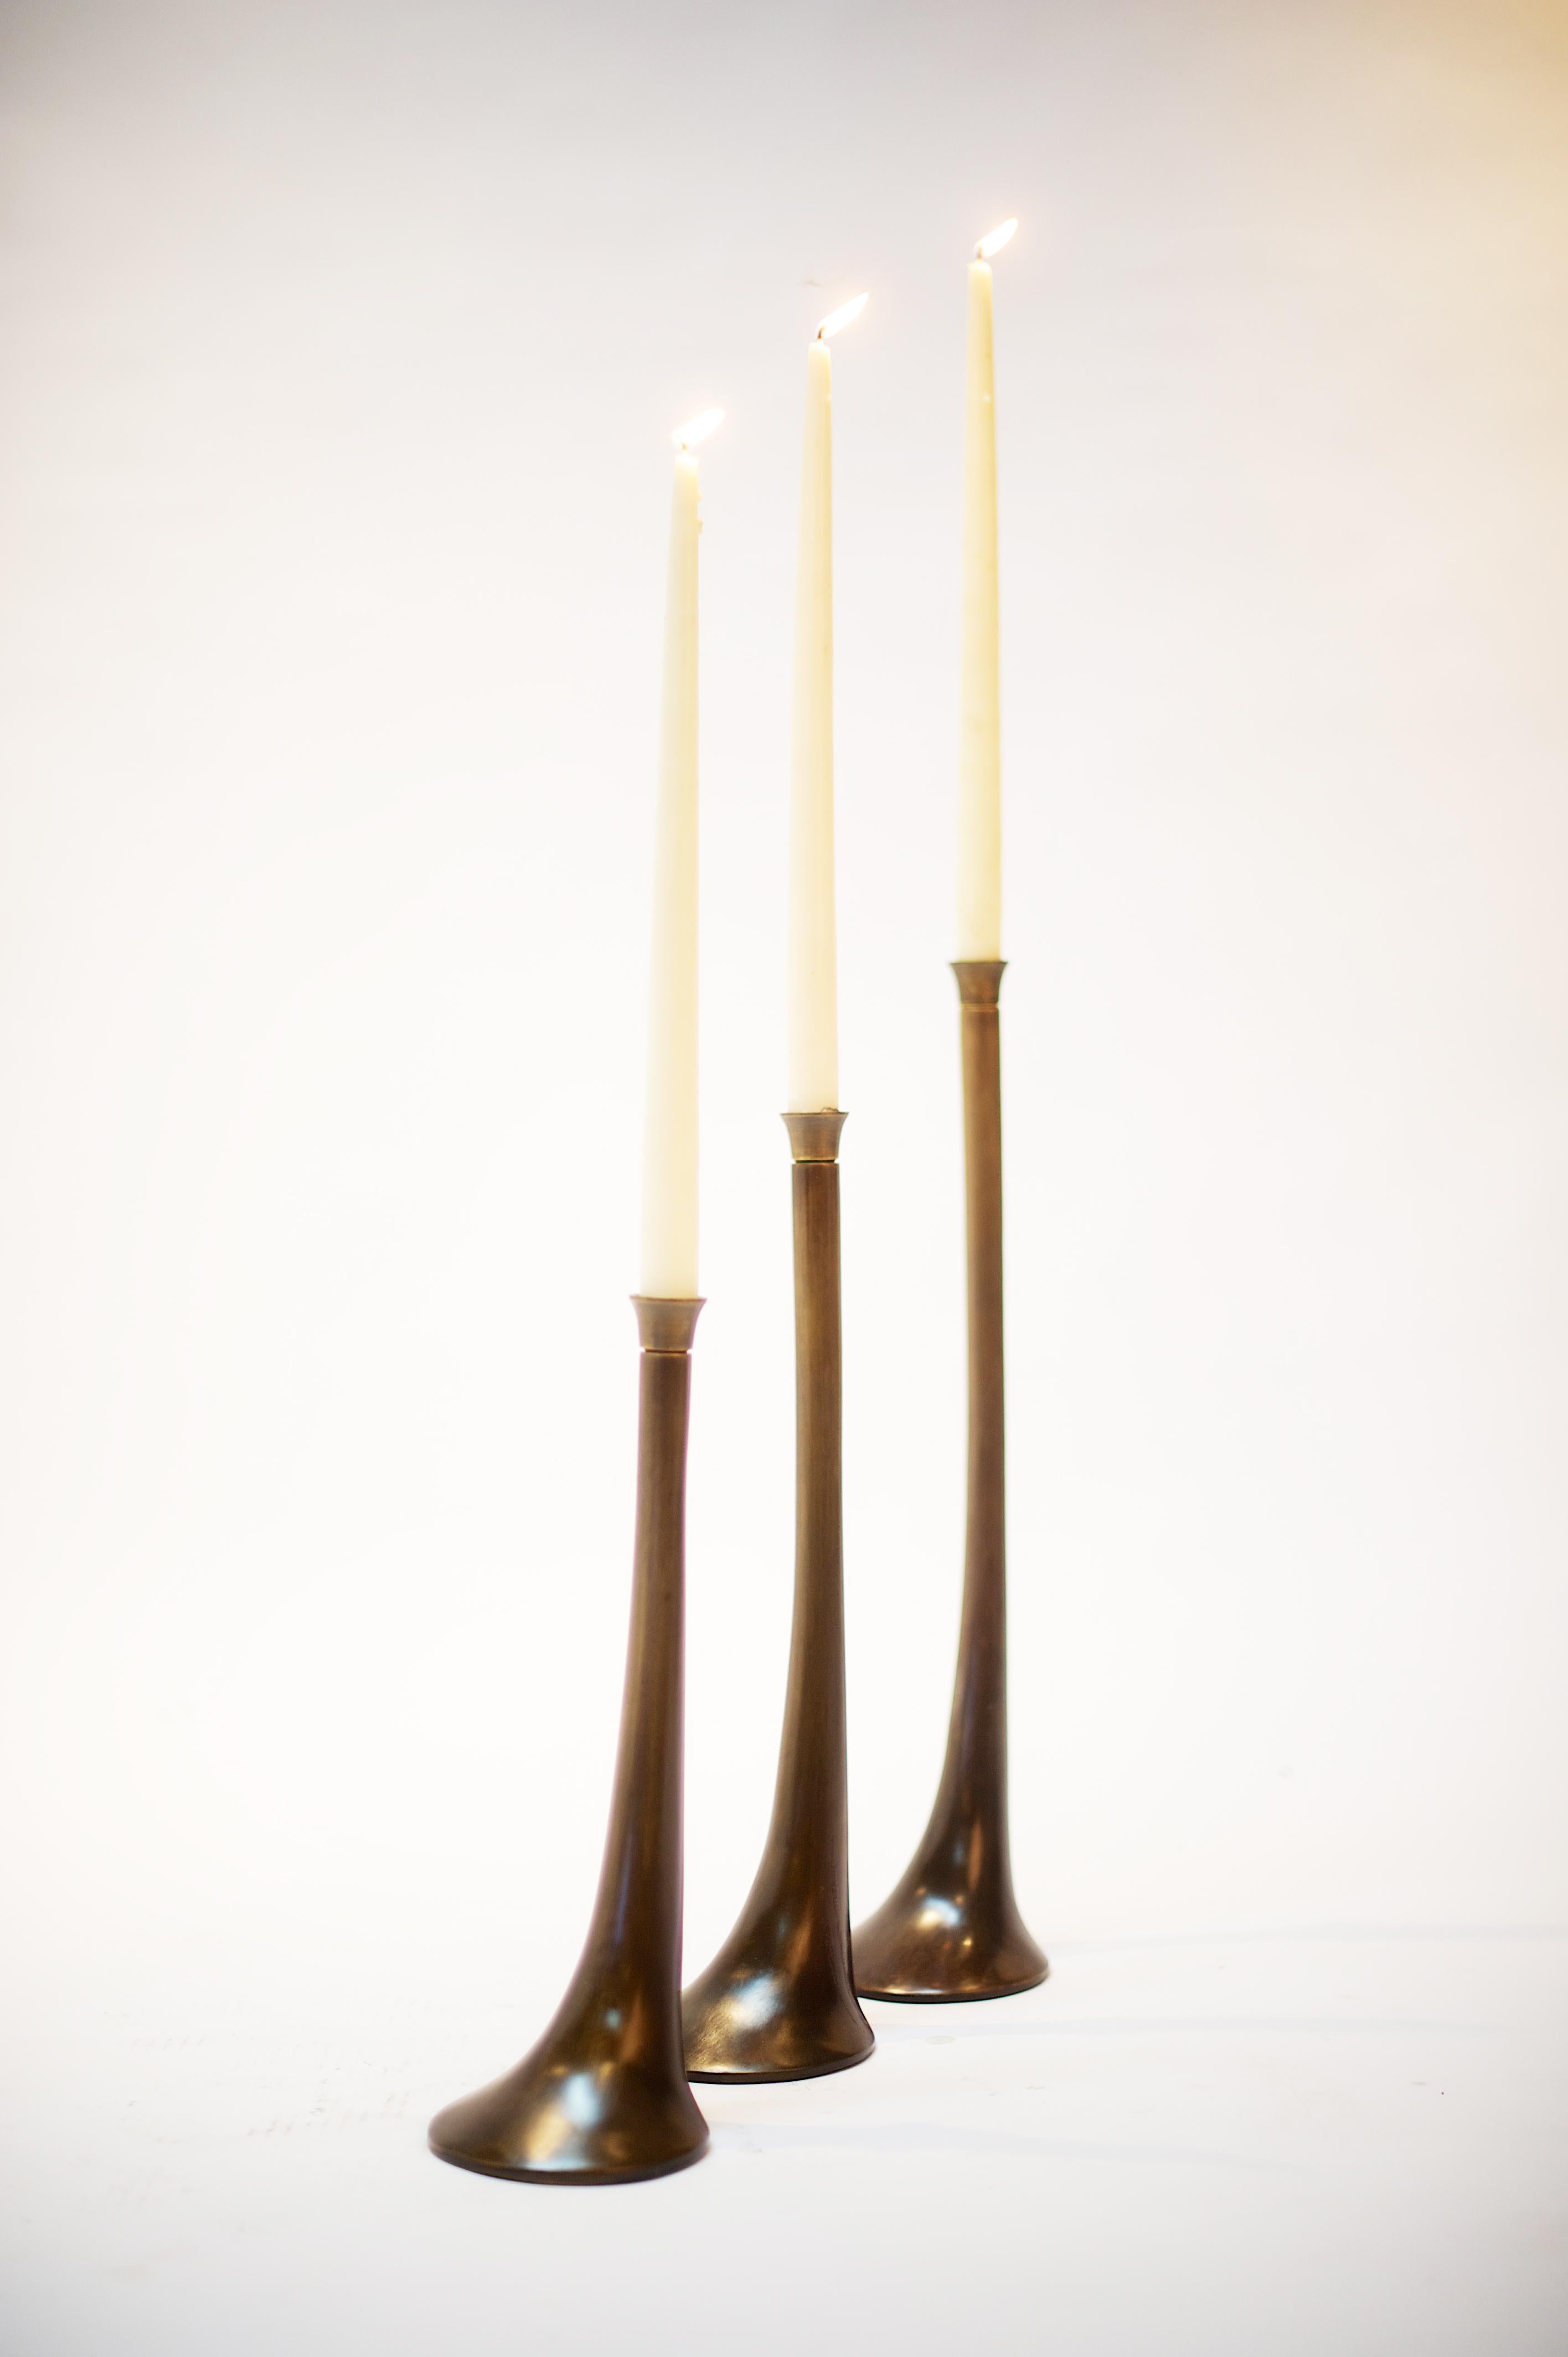 The Elm Candleholders are cast using the lost wax method in an elegant sculptural shape. Shown in our antique bronze finish, with highlights (ombre). Comes in 3 sizes.